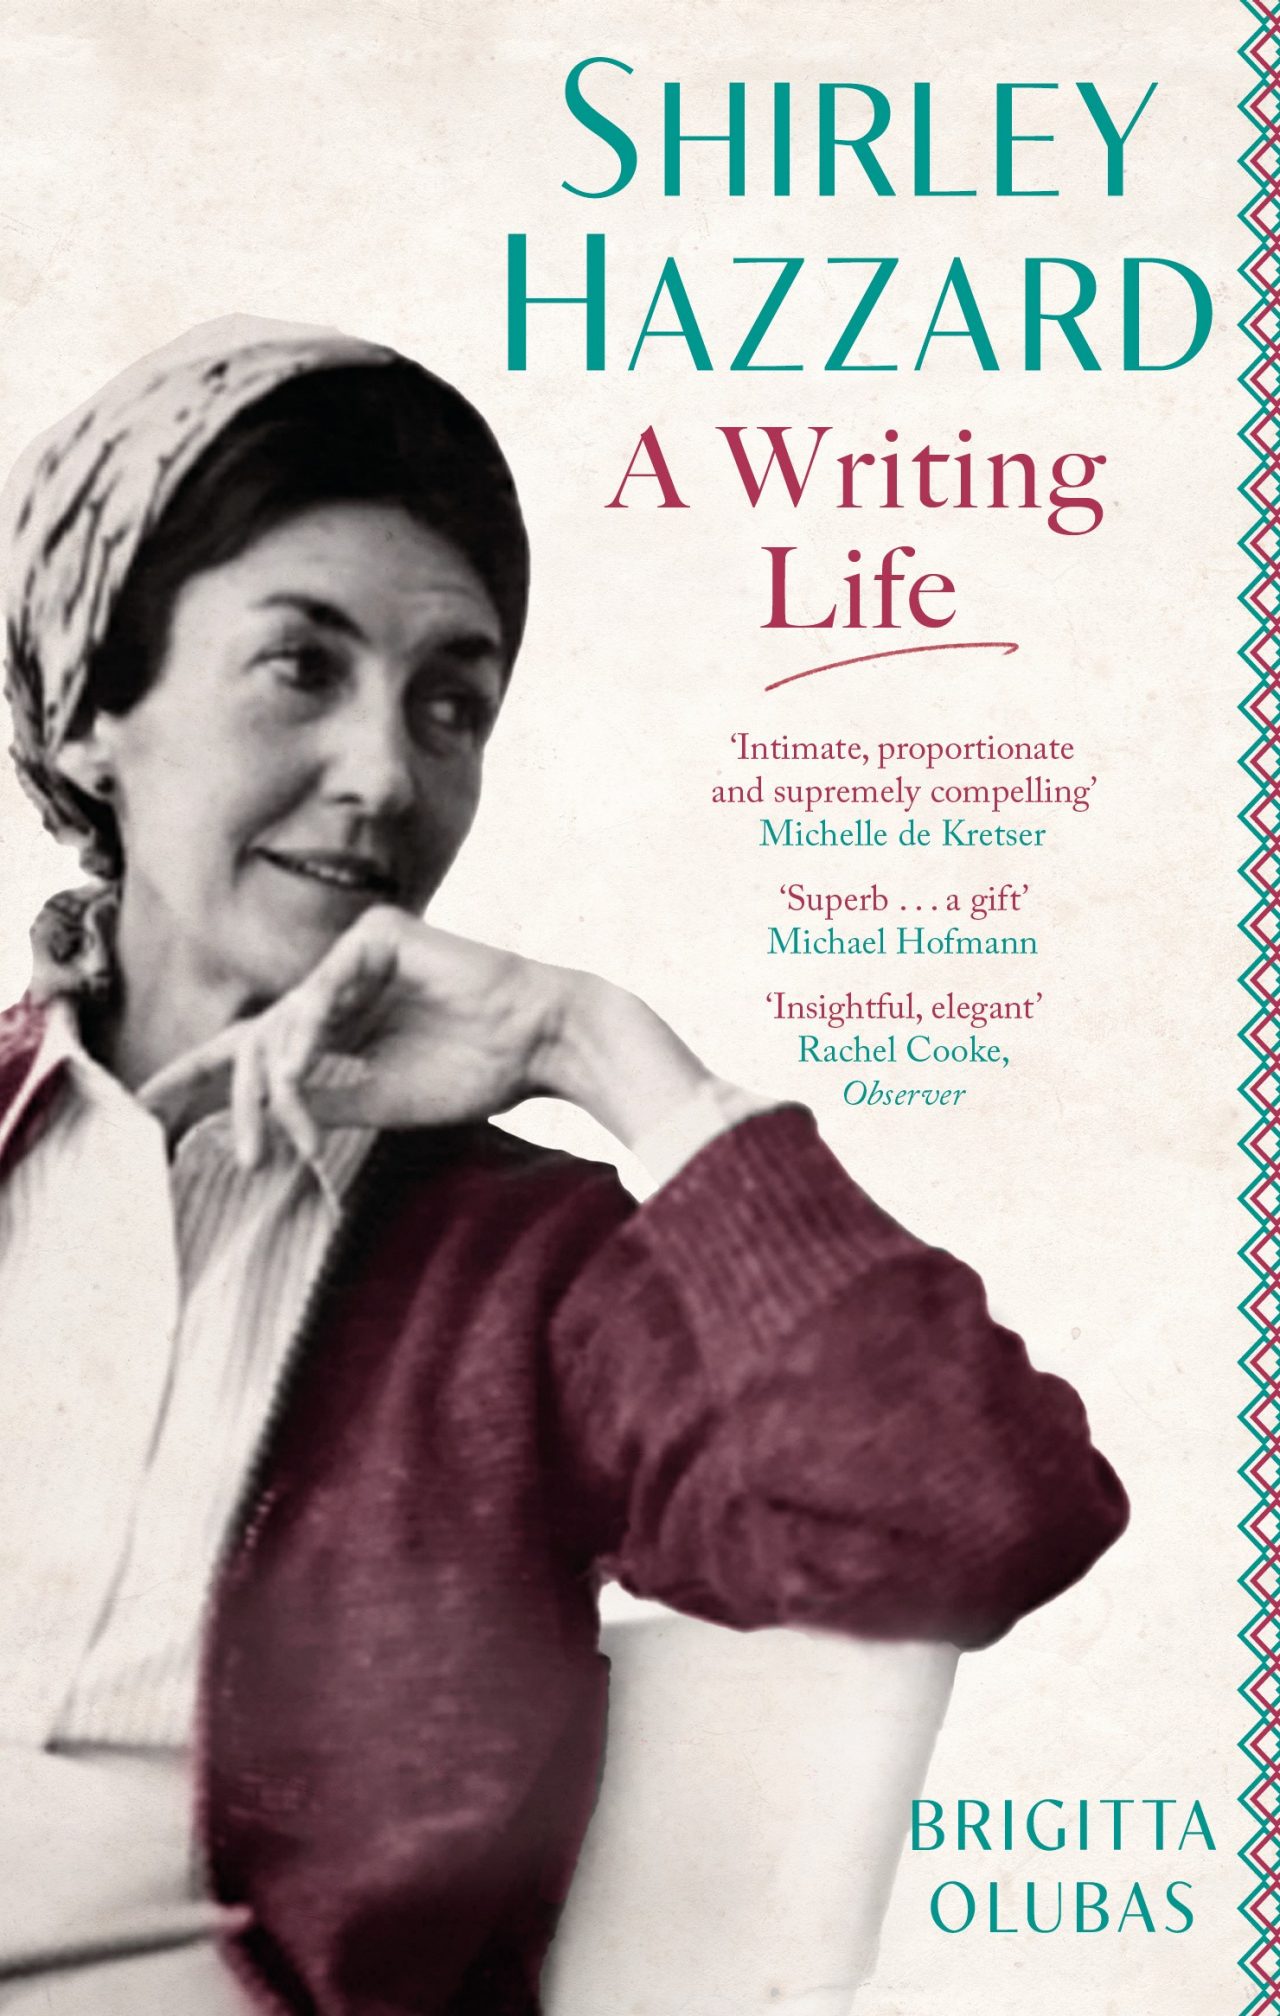 Book cover for Shirley Hazzard's A Writing Life